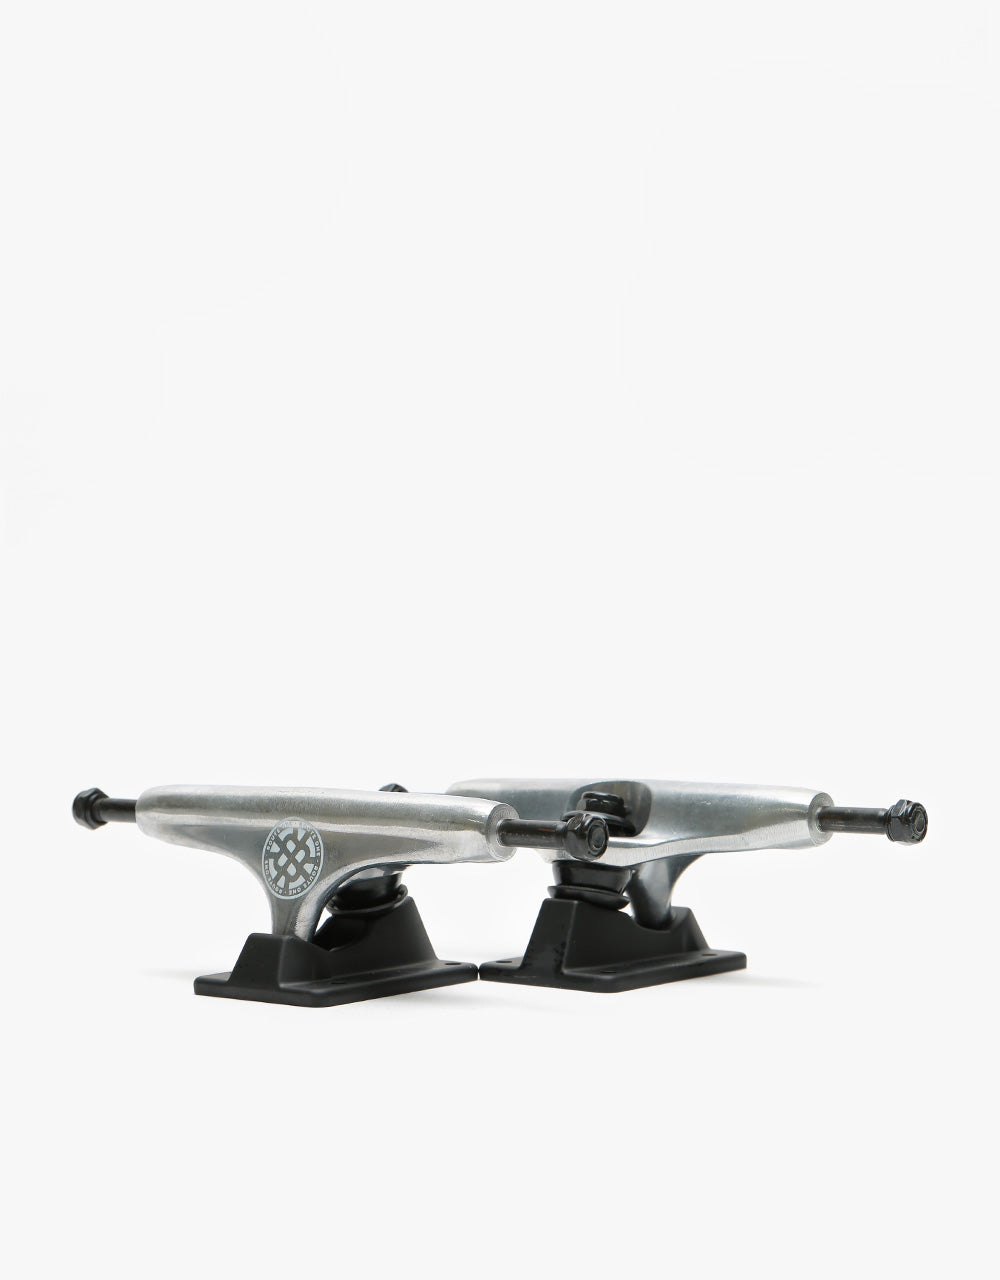 Route One Stamp Logo 5.0 Low Skateboard Trucks (Pair)